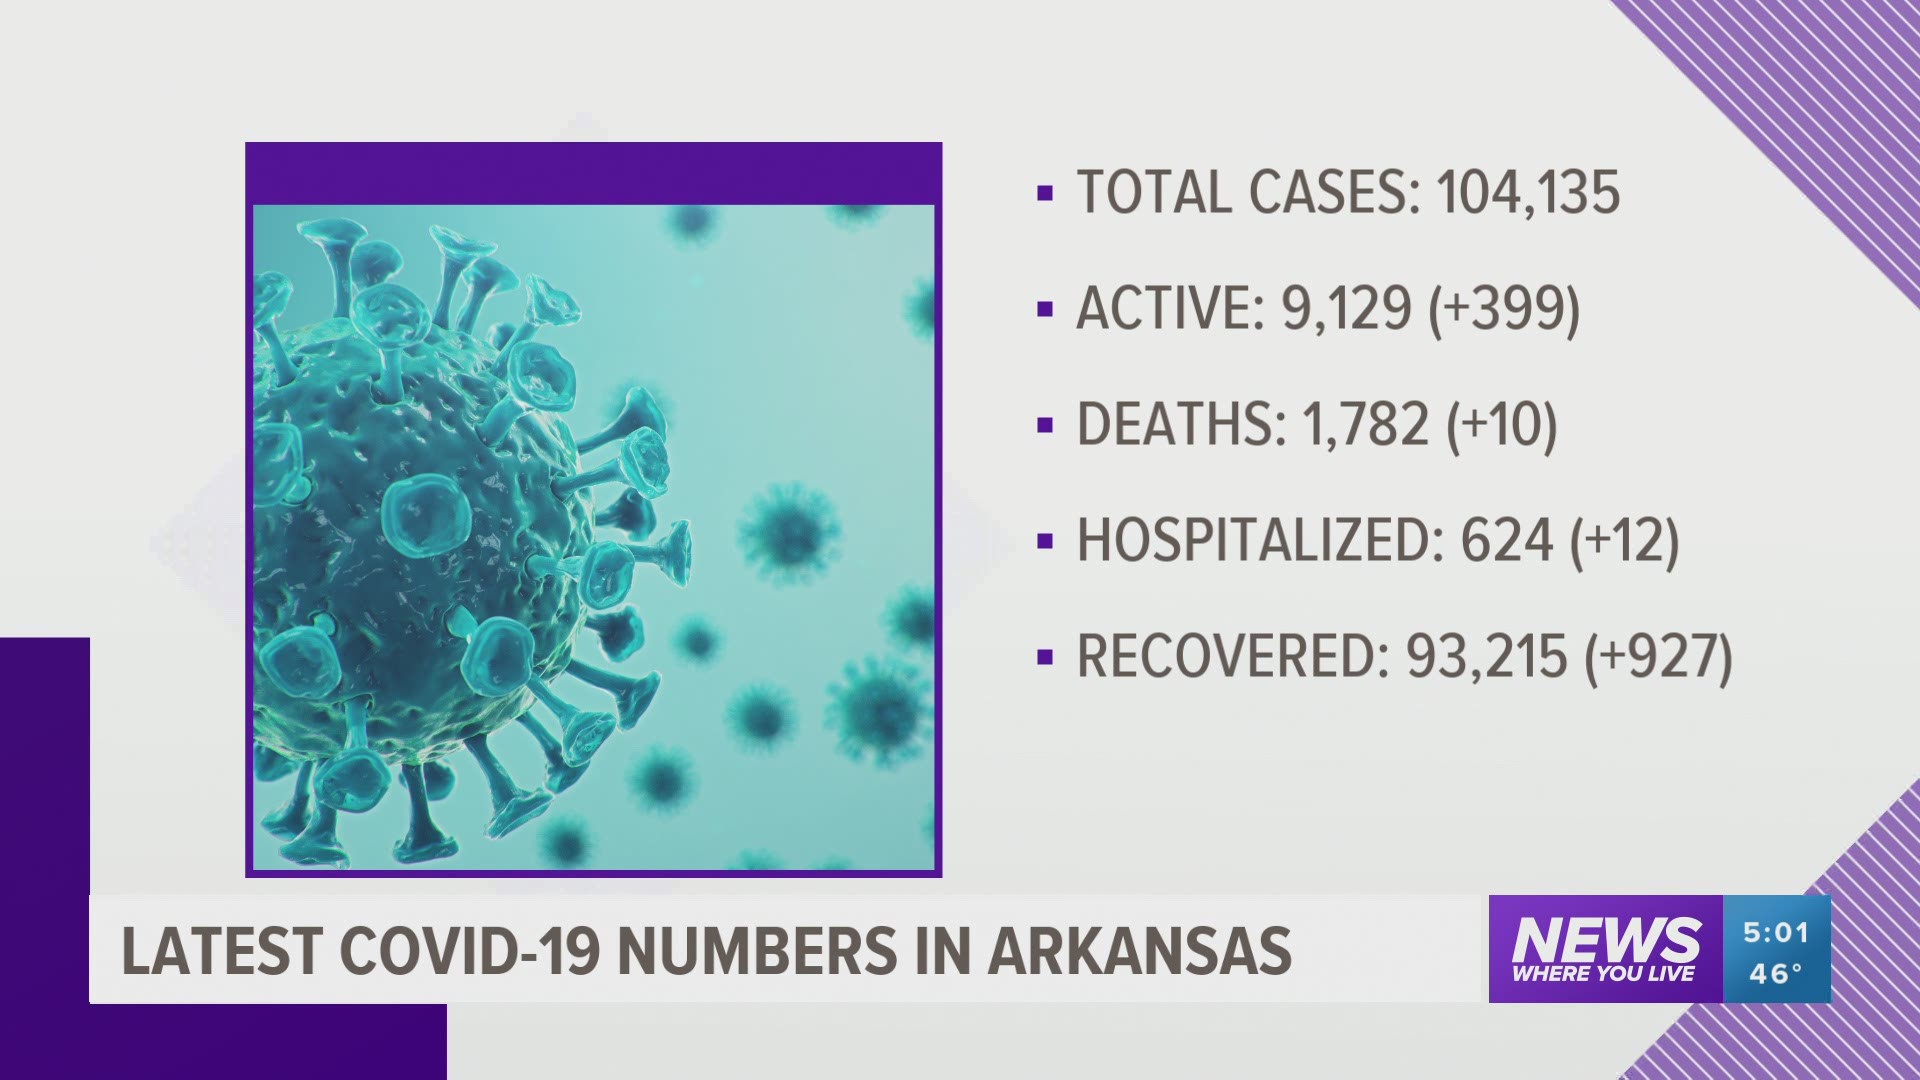 A look at the latest case numbers for the coronavirus in Arkansas on Friday, October 23. https://bit.ly/3iqGRnx